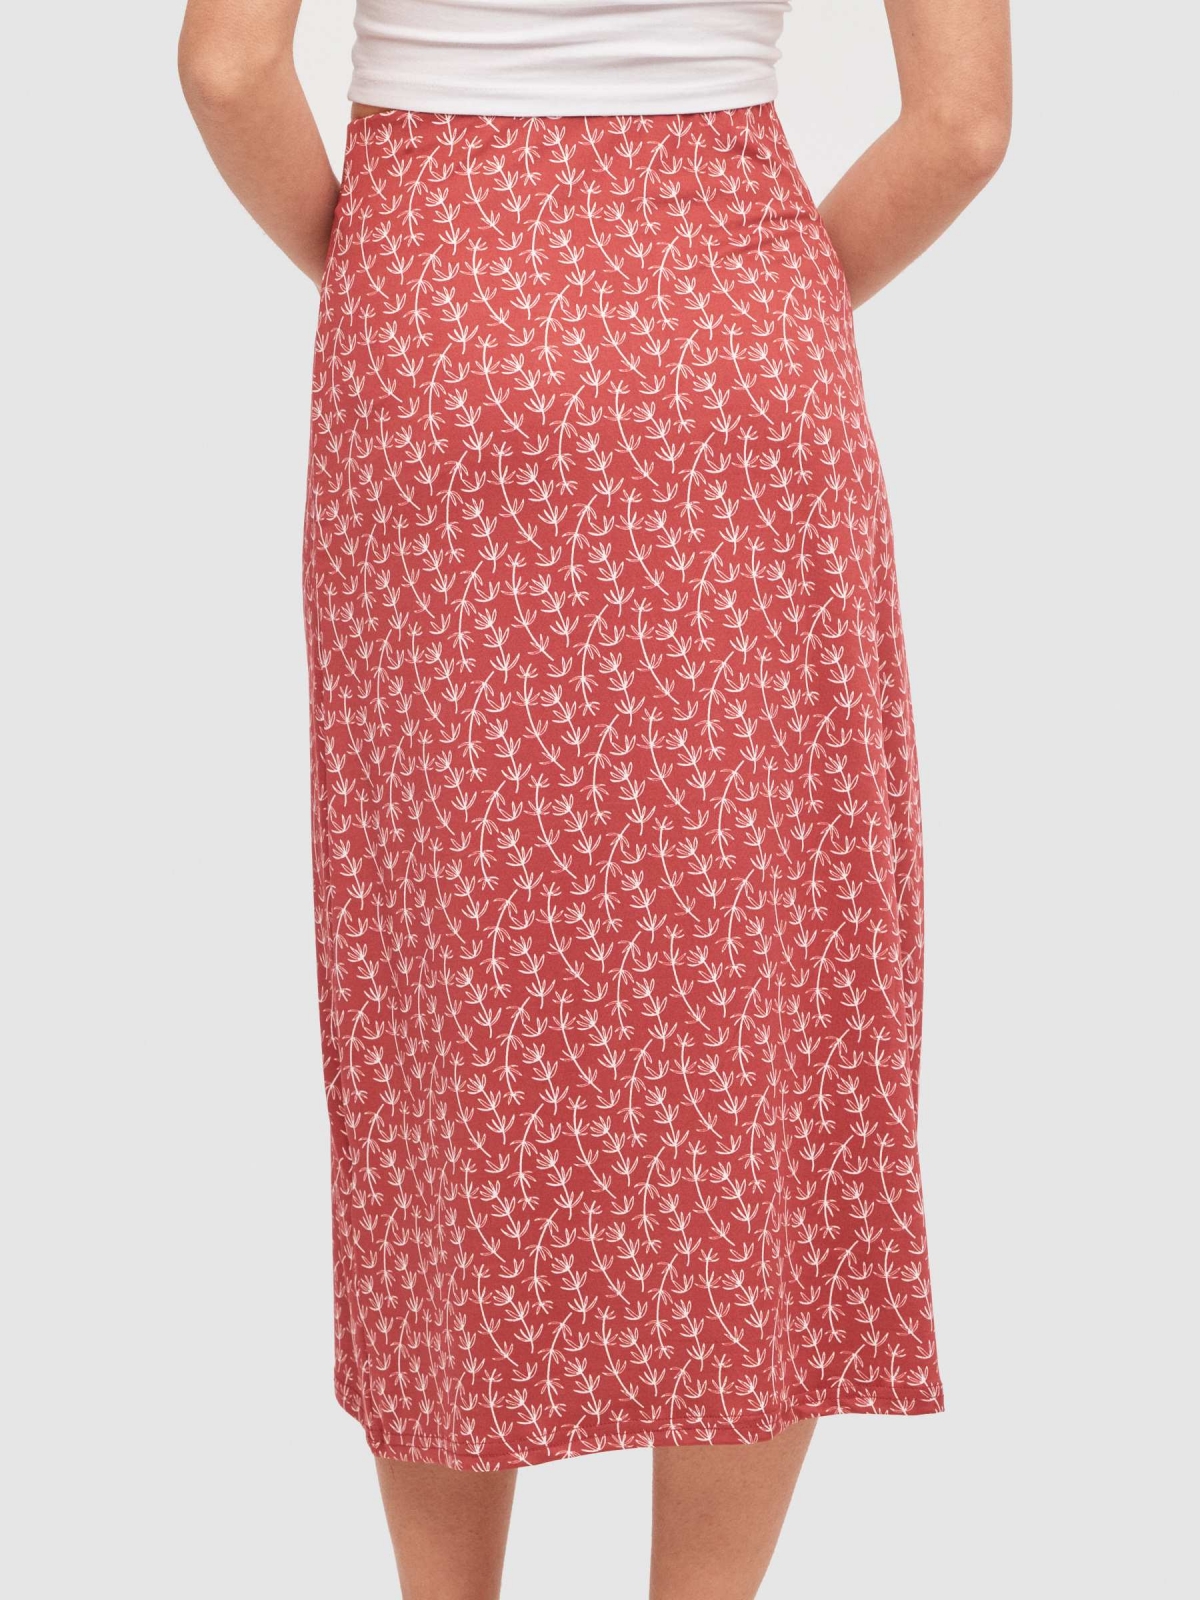 Floral midi skirt red detail view